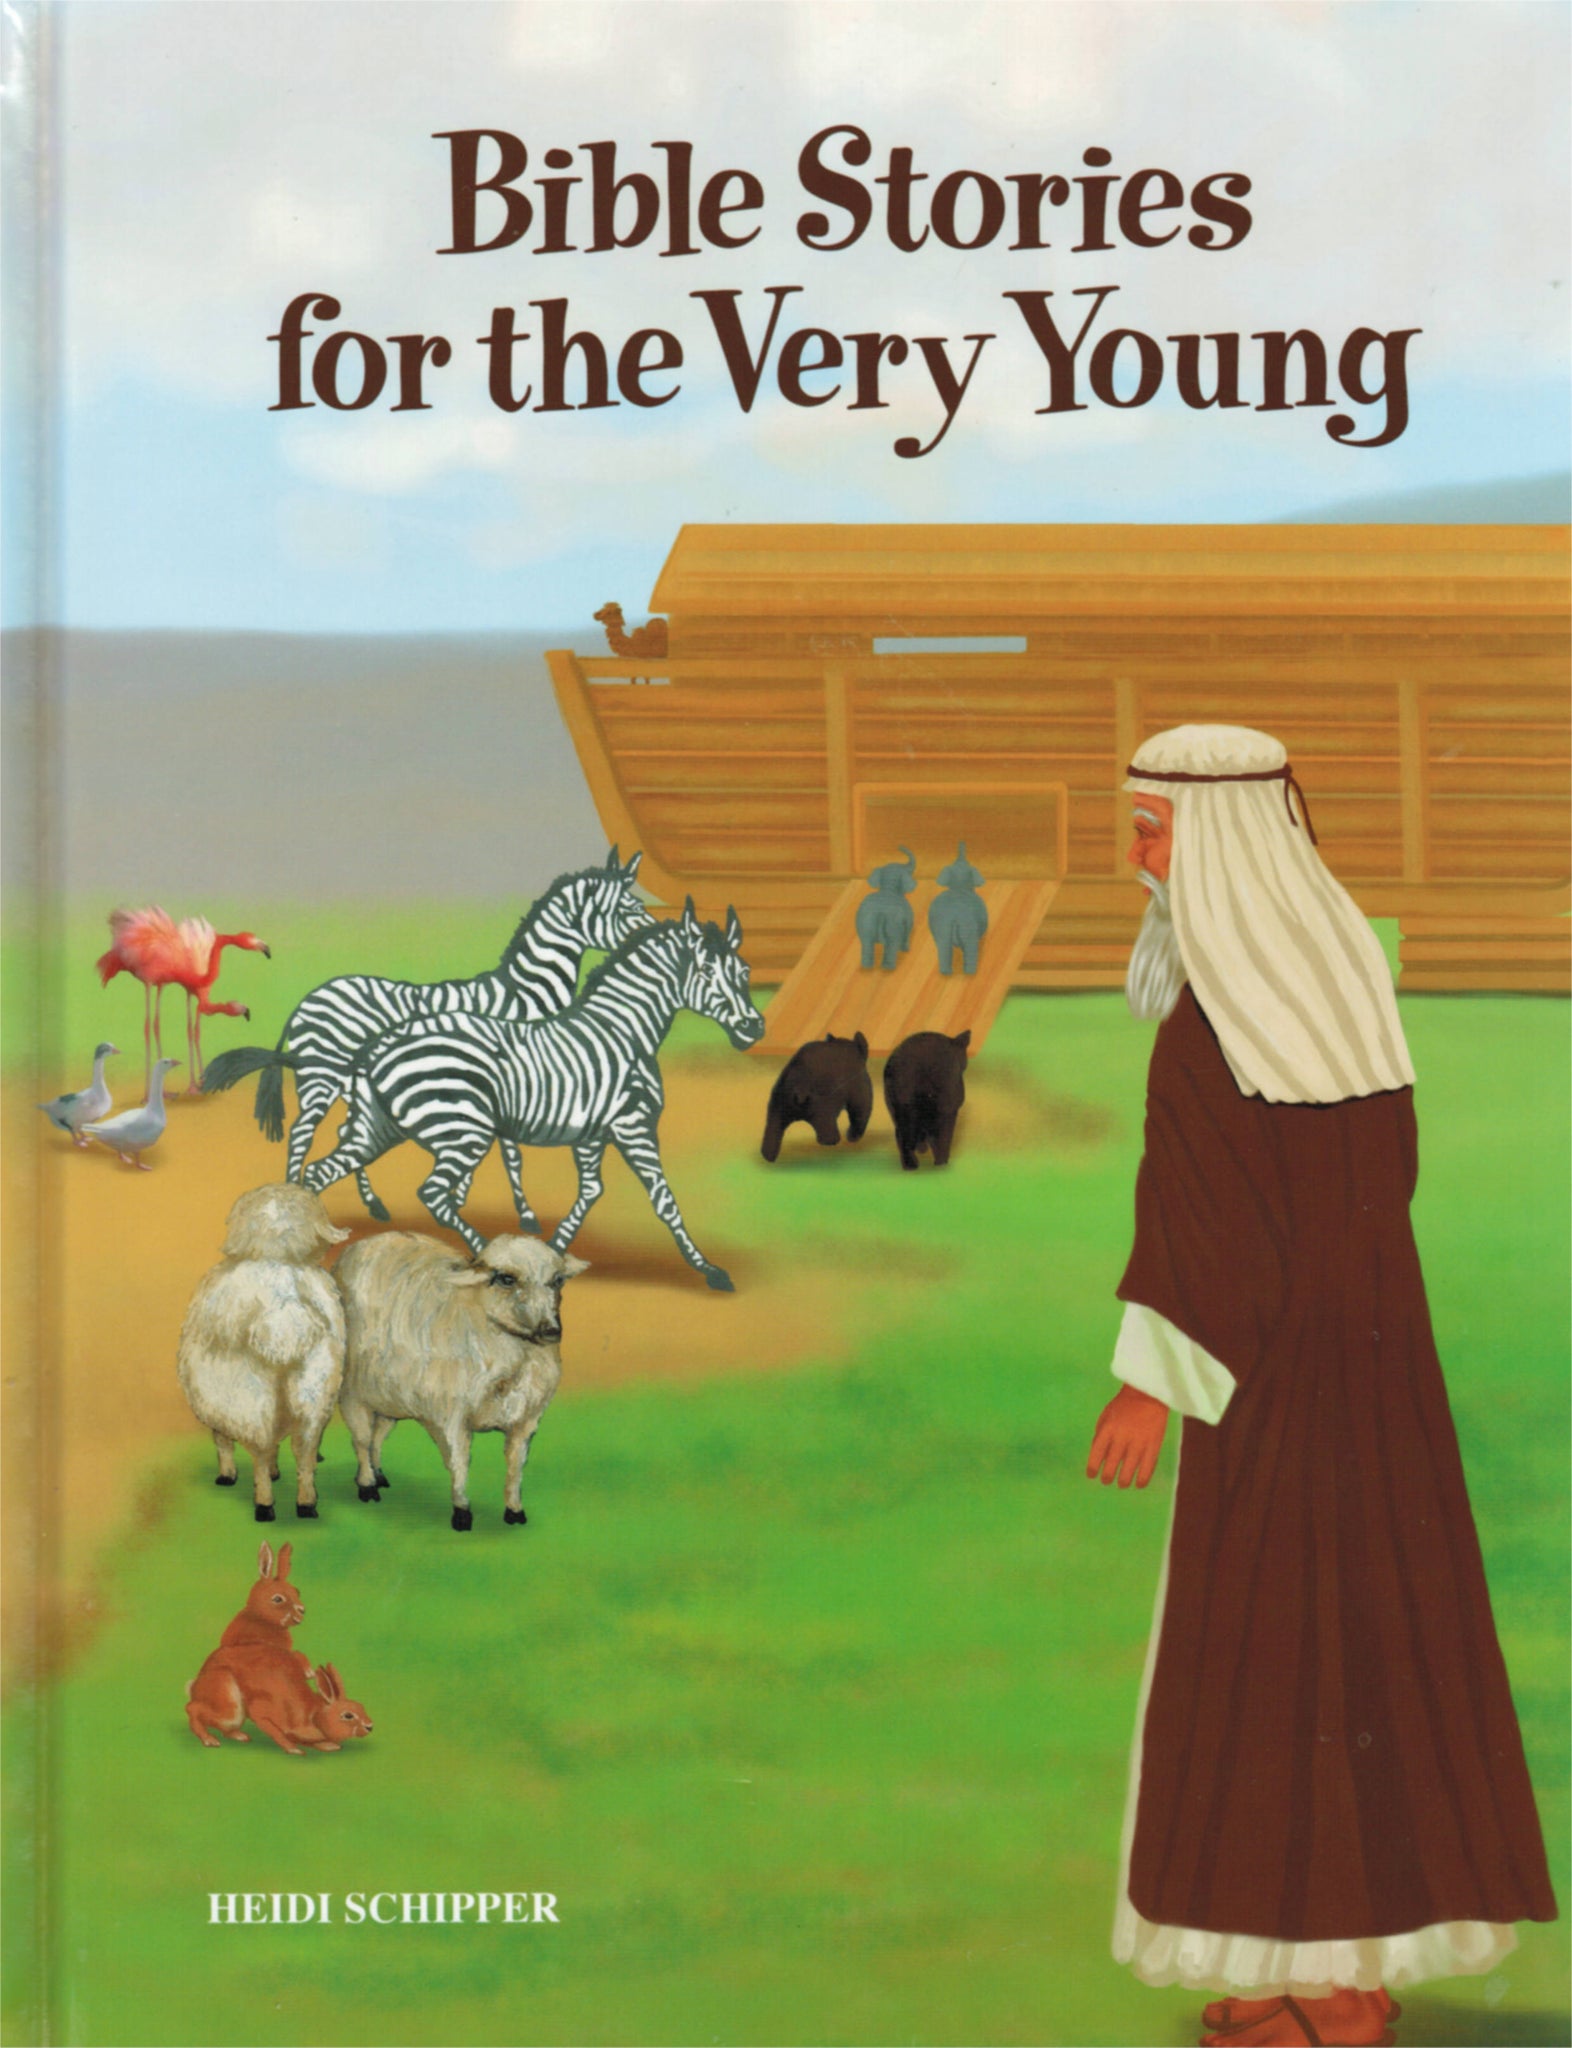 Bible Stories for the Very Young Volume 1